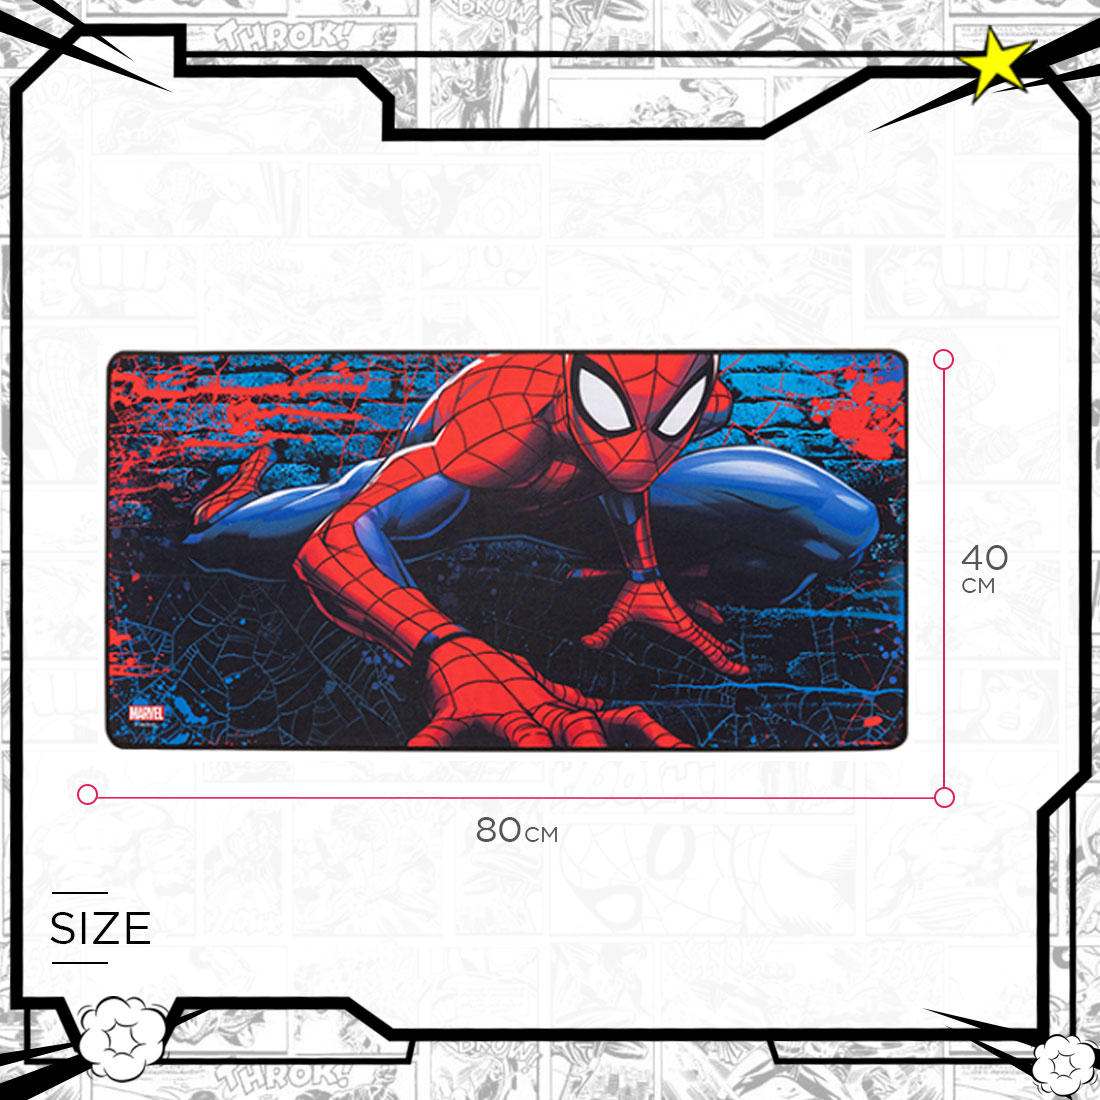 MINISO Marvel Desk Pad Office Non-Slip Desk Cover Protector Desk Mat Mouse Pads Desk Writing Mat for Office and Home Work Spiderman - image 2 of 7